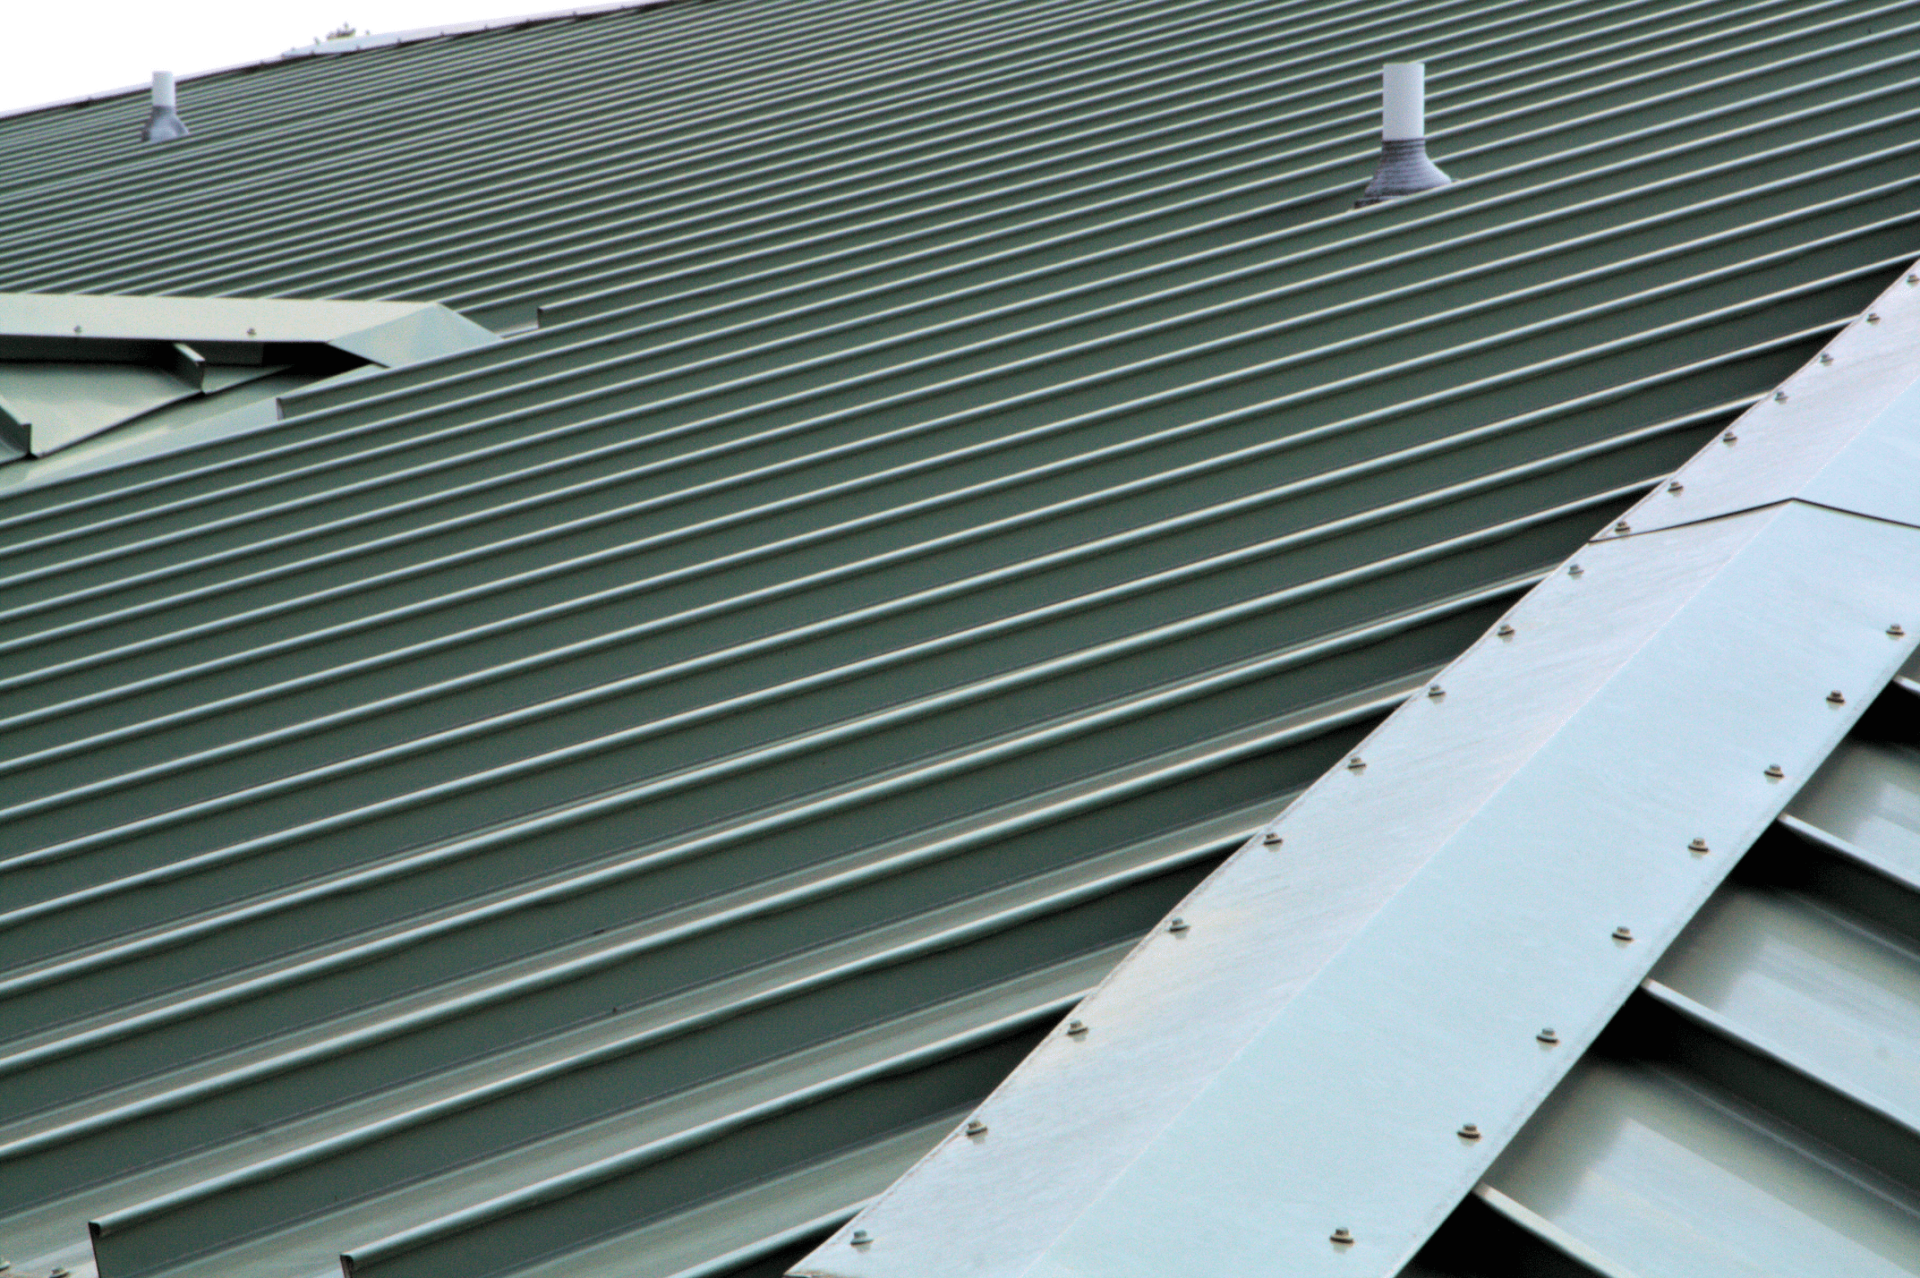 Metal Re-Roofing Services | Colorbond Re-Roof | Metal Re-Roof Rockhampton